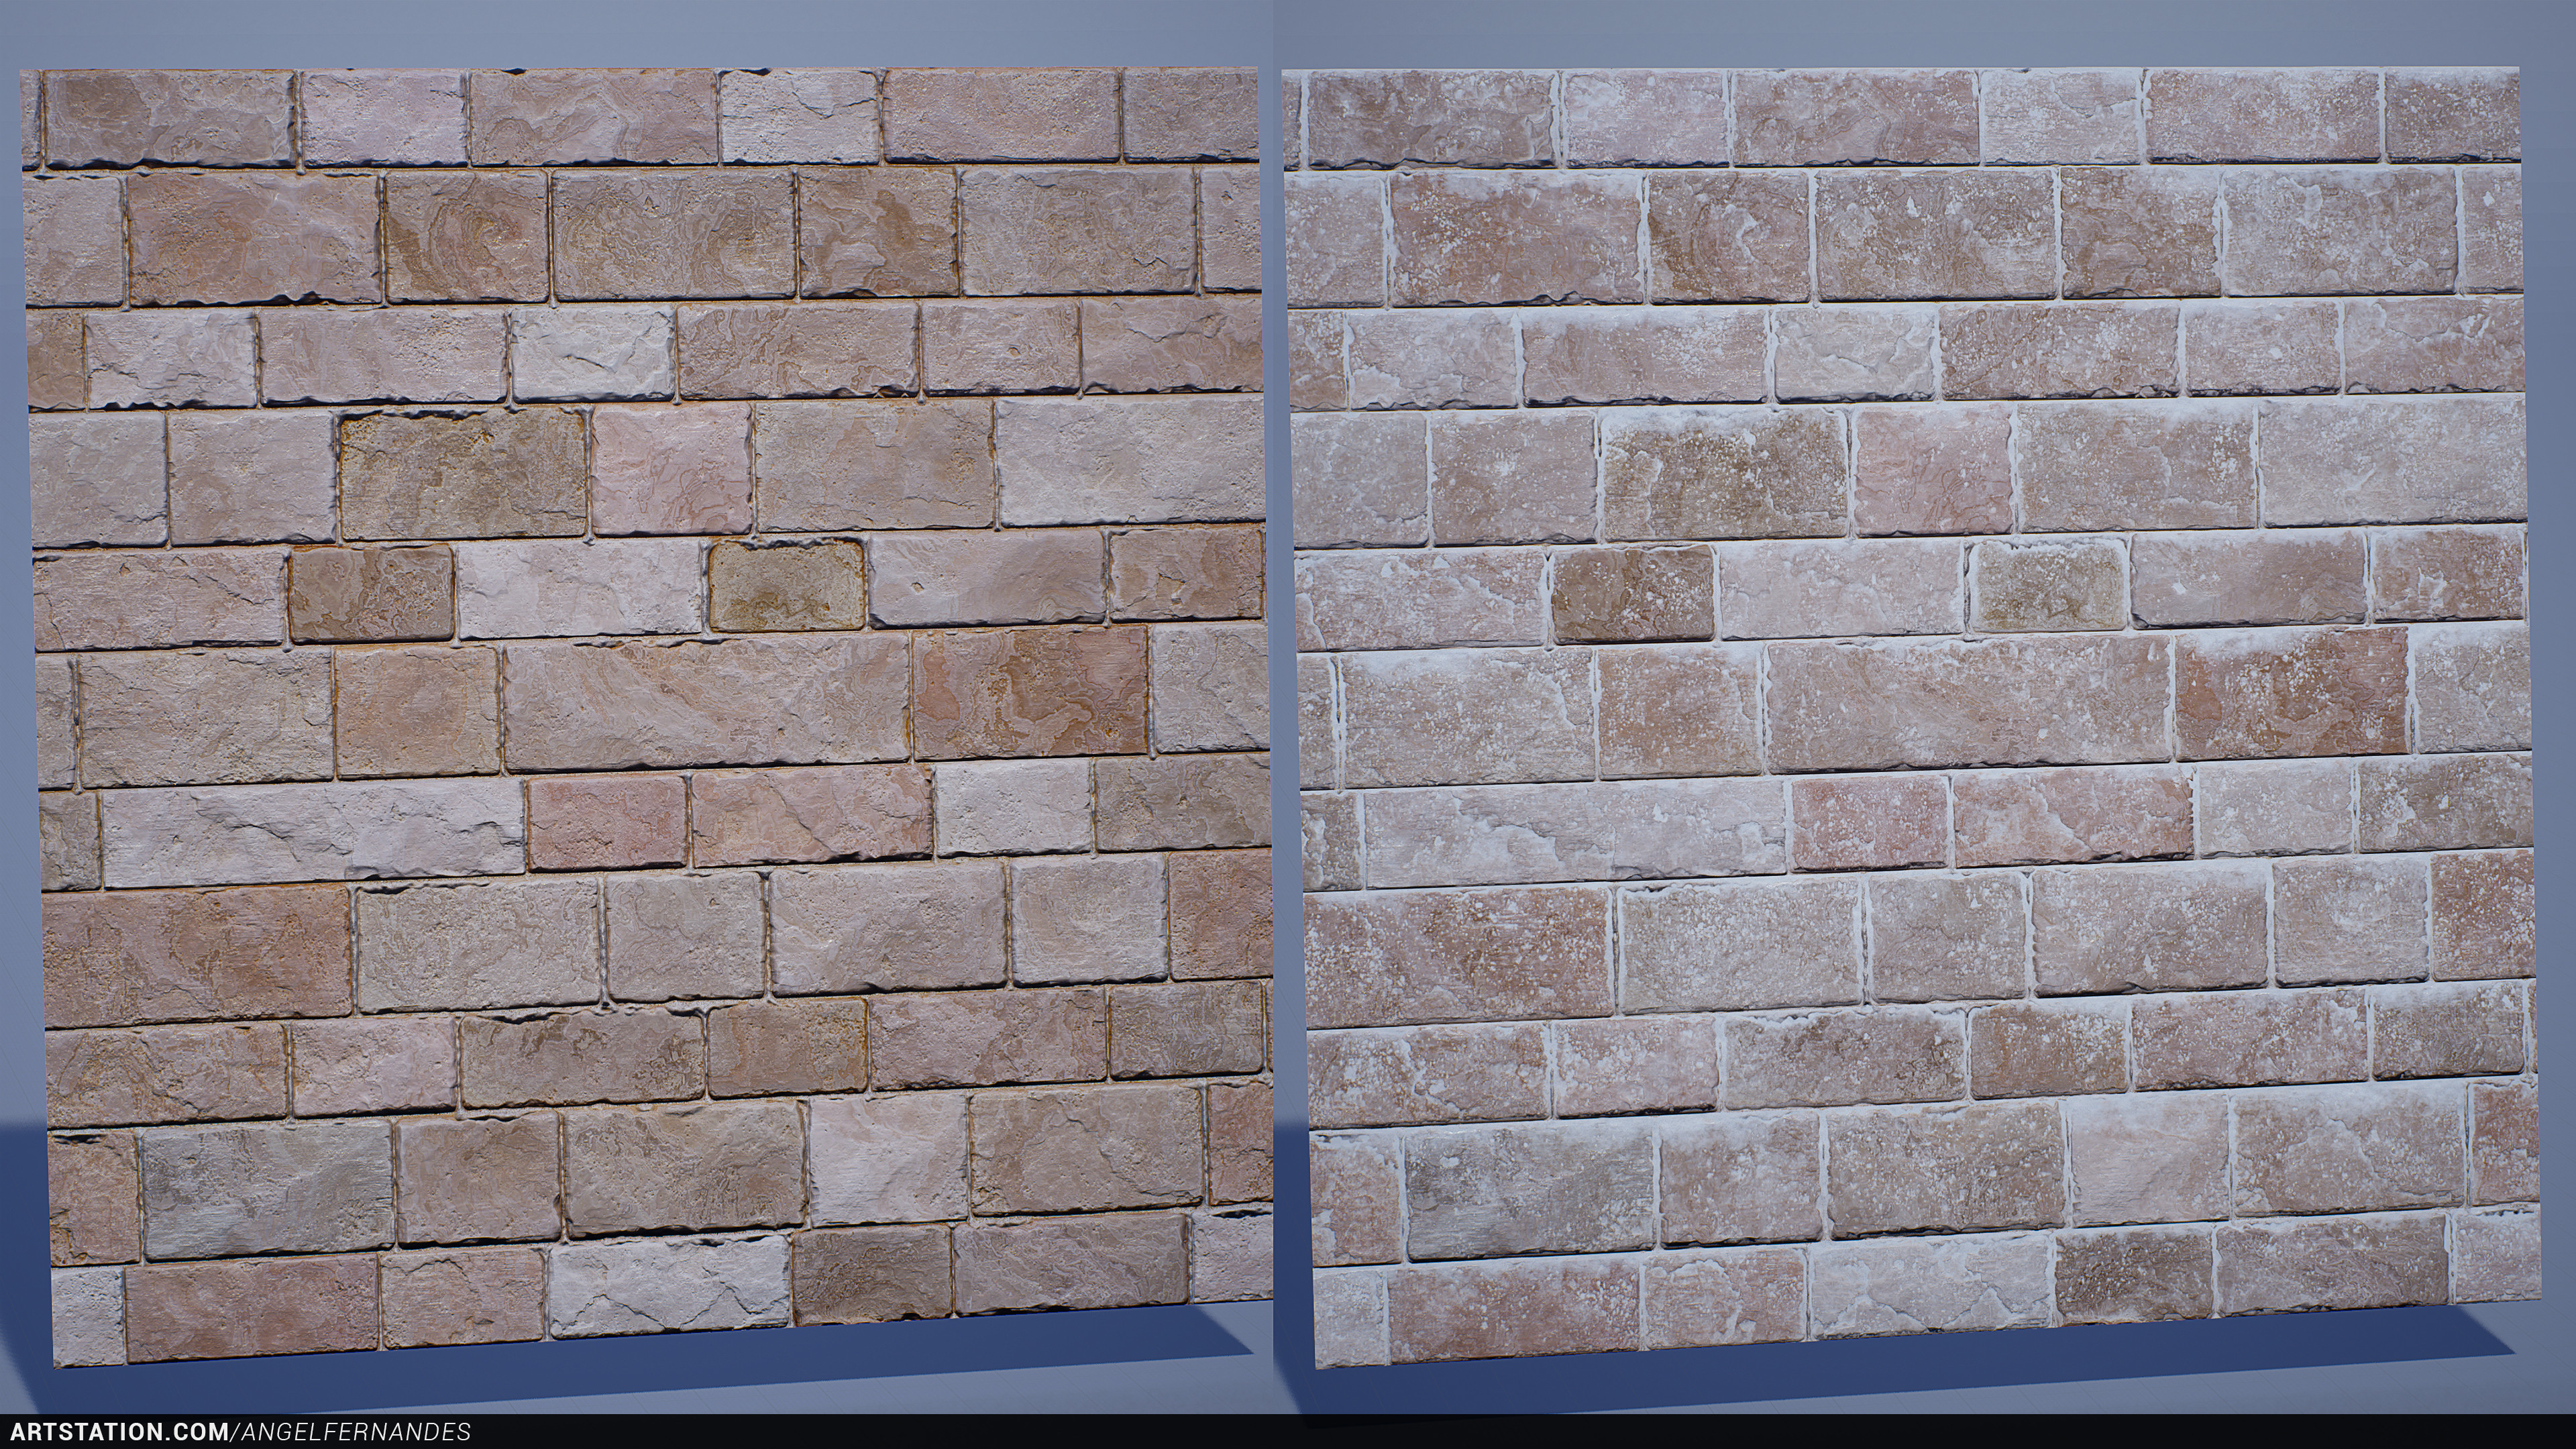 Bricks/Stone wall texture set with and with out snow.